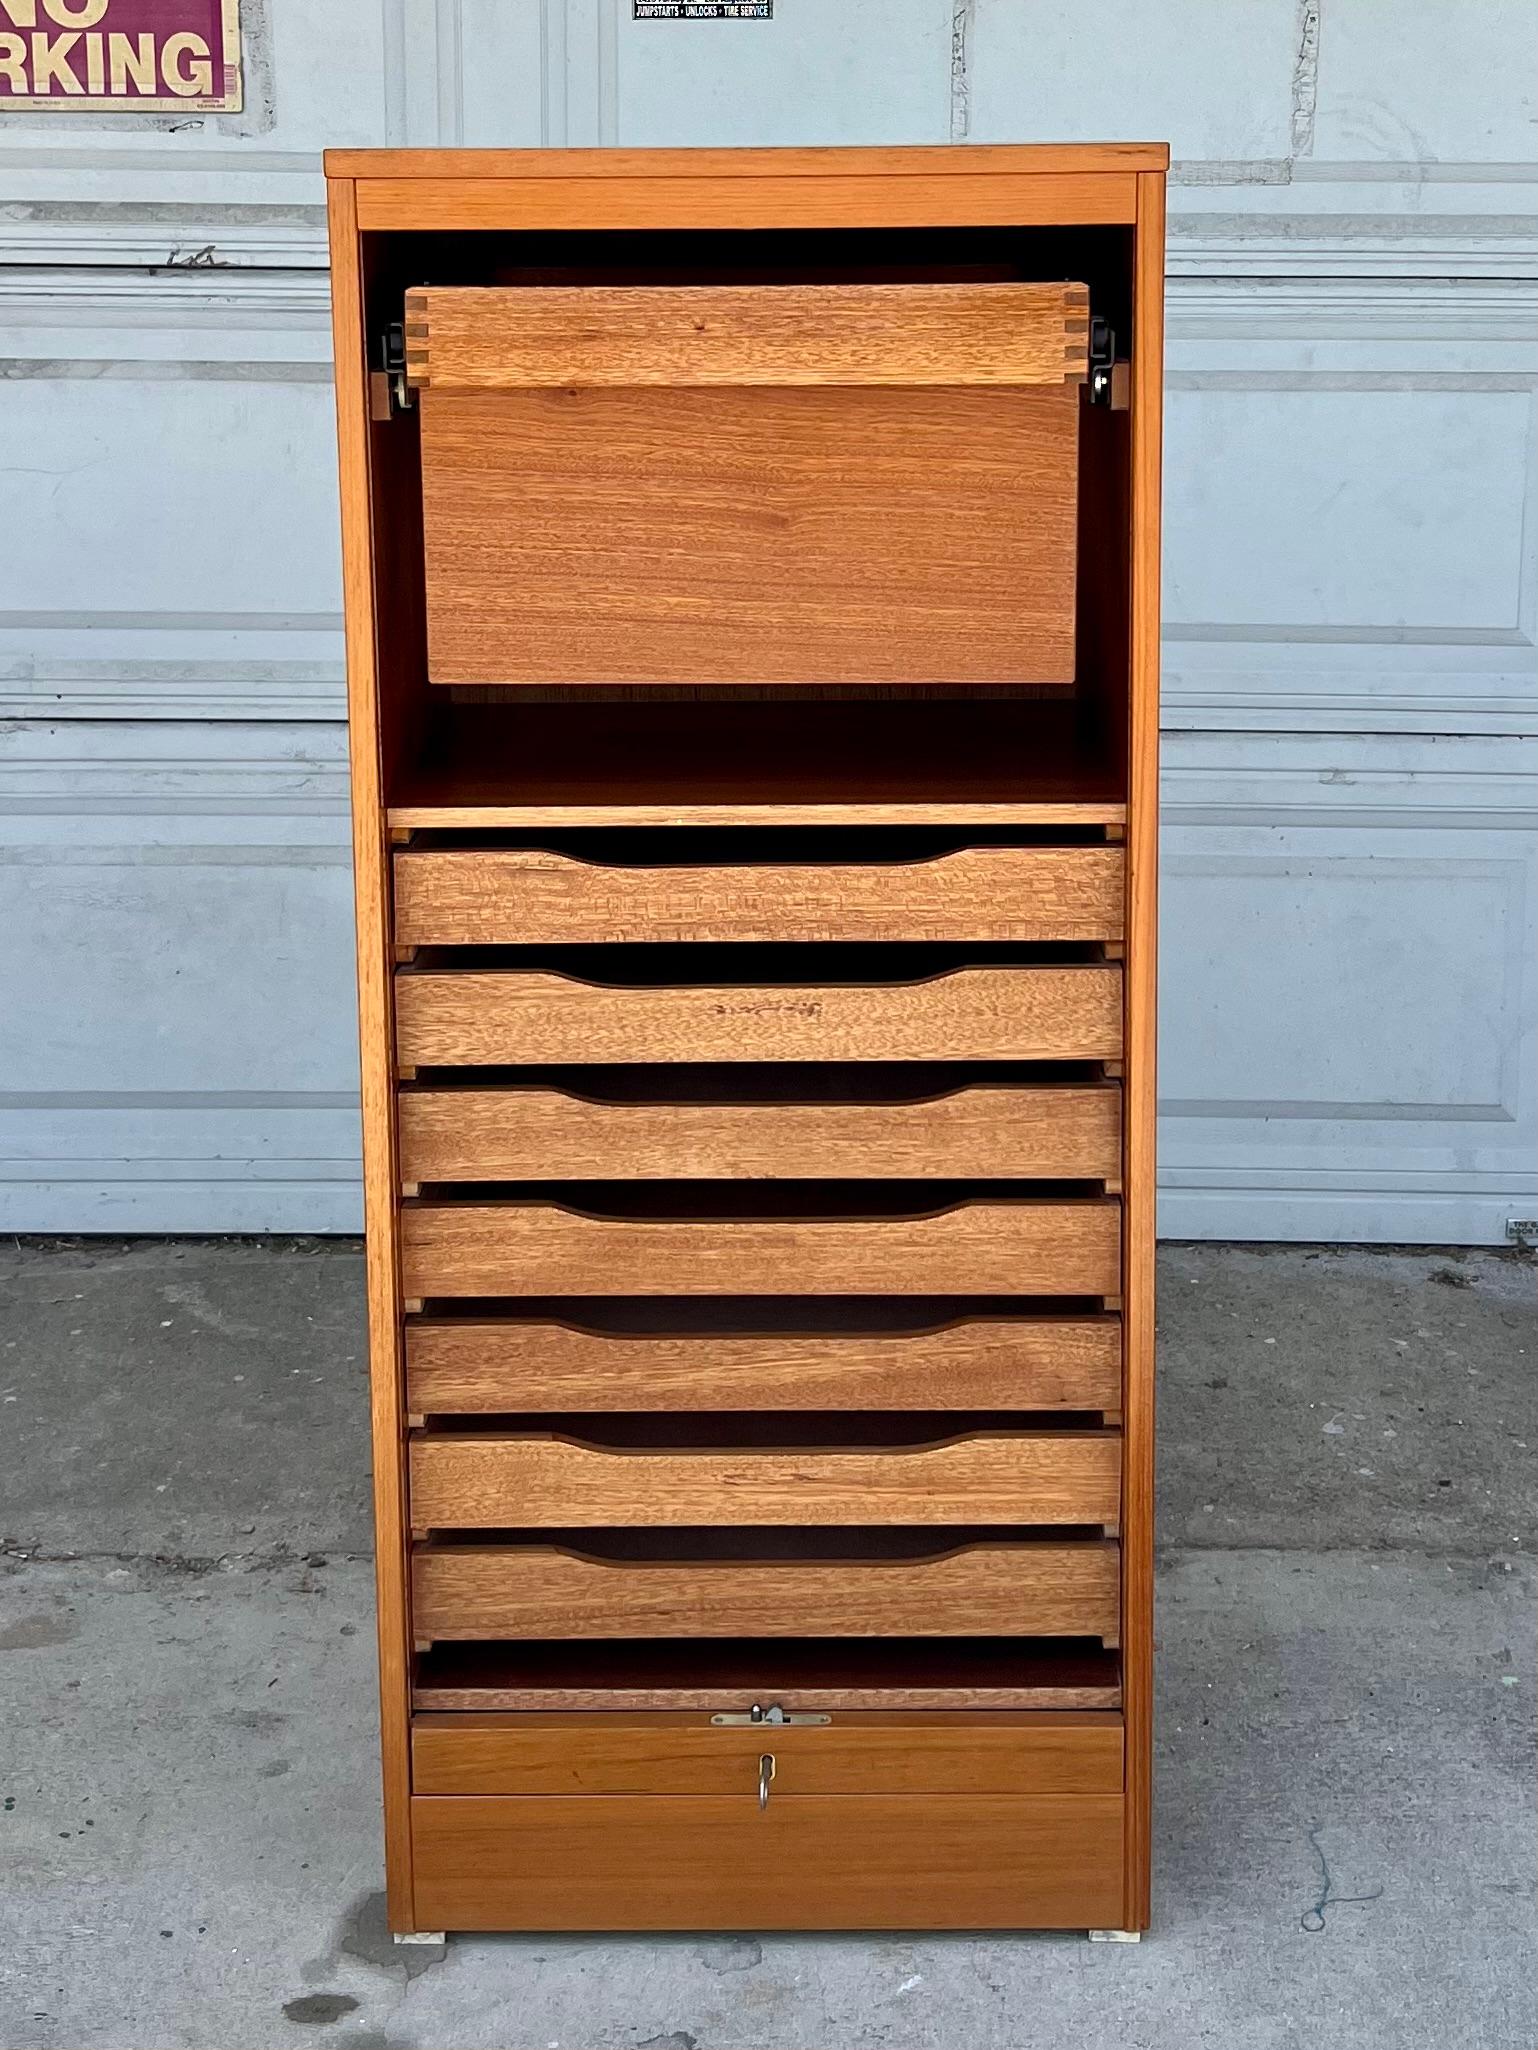 This Mid Century Teak Cabinet offers plenty of space for organization behind its smooth gliding tambour door. Rich teak grain completes this piece making it a stylish addition to any office or room. The cabinet has been thoroughly cleaned and